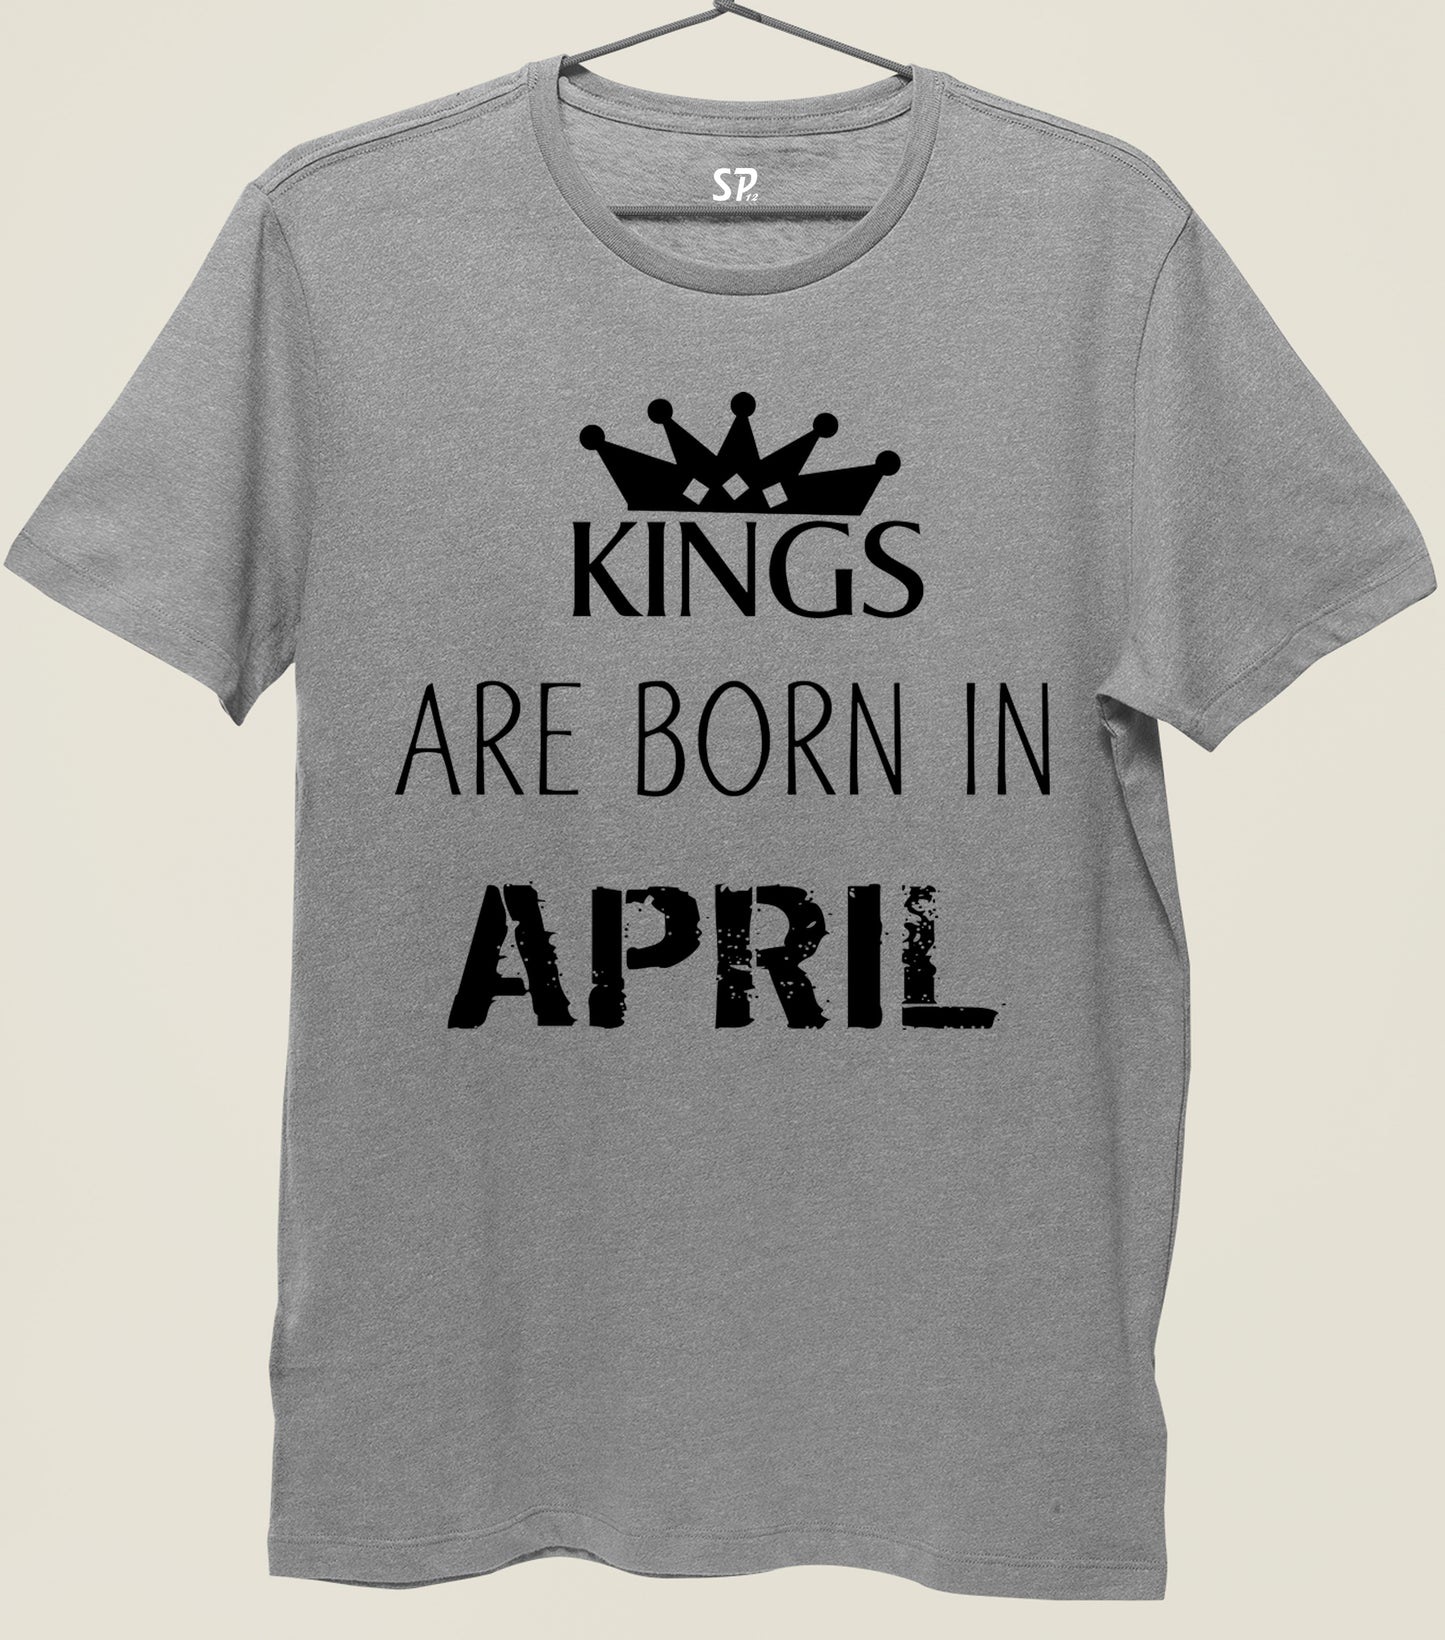 Birthday T Shirt Kings are born in April